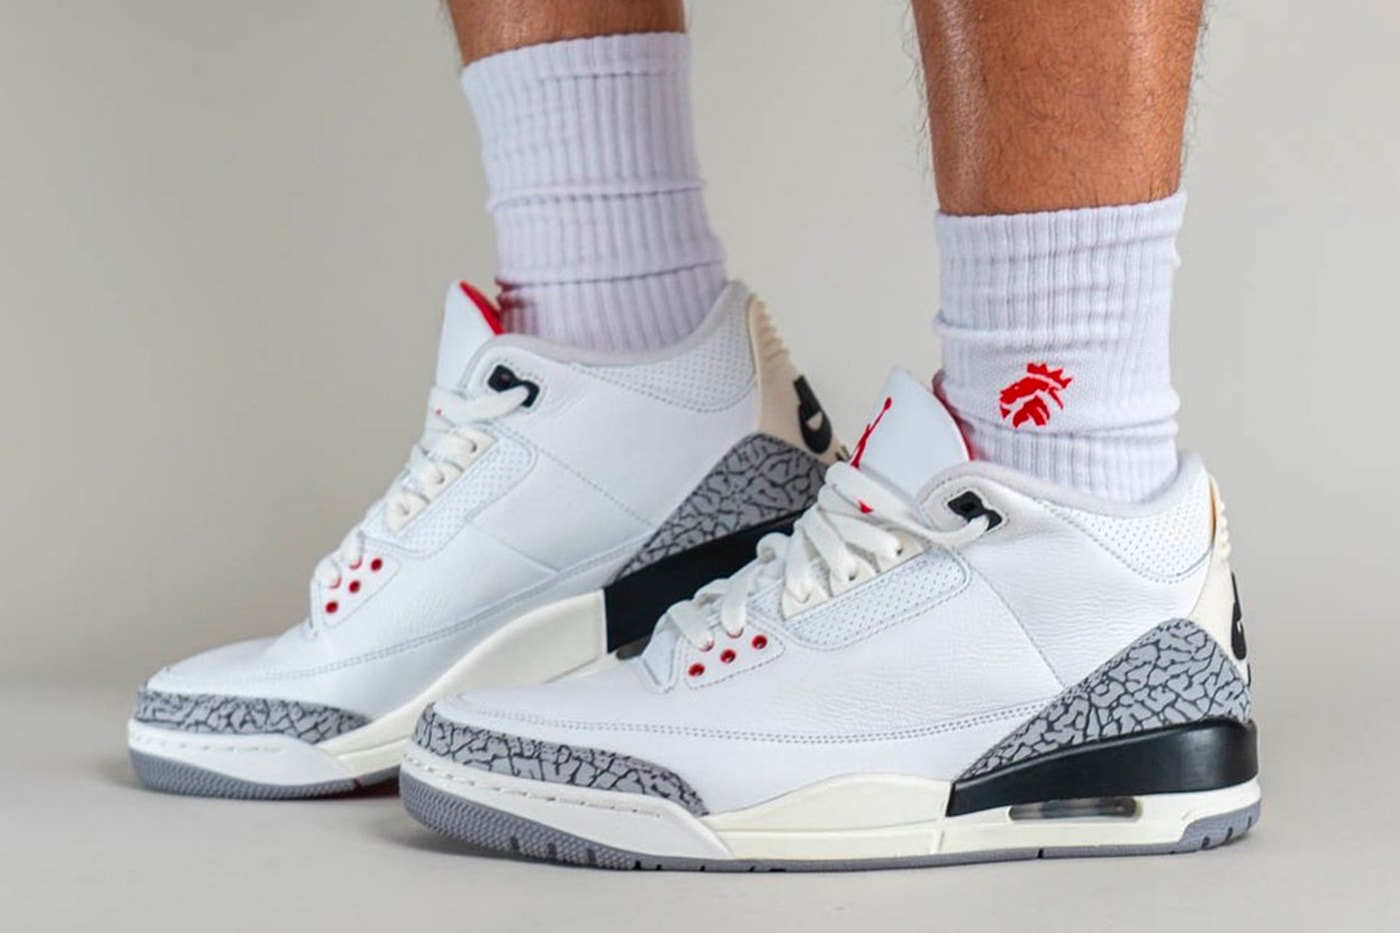 Nike Air Jordan 3 Fire Red 2022: Resale Prices & Where to Buy